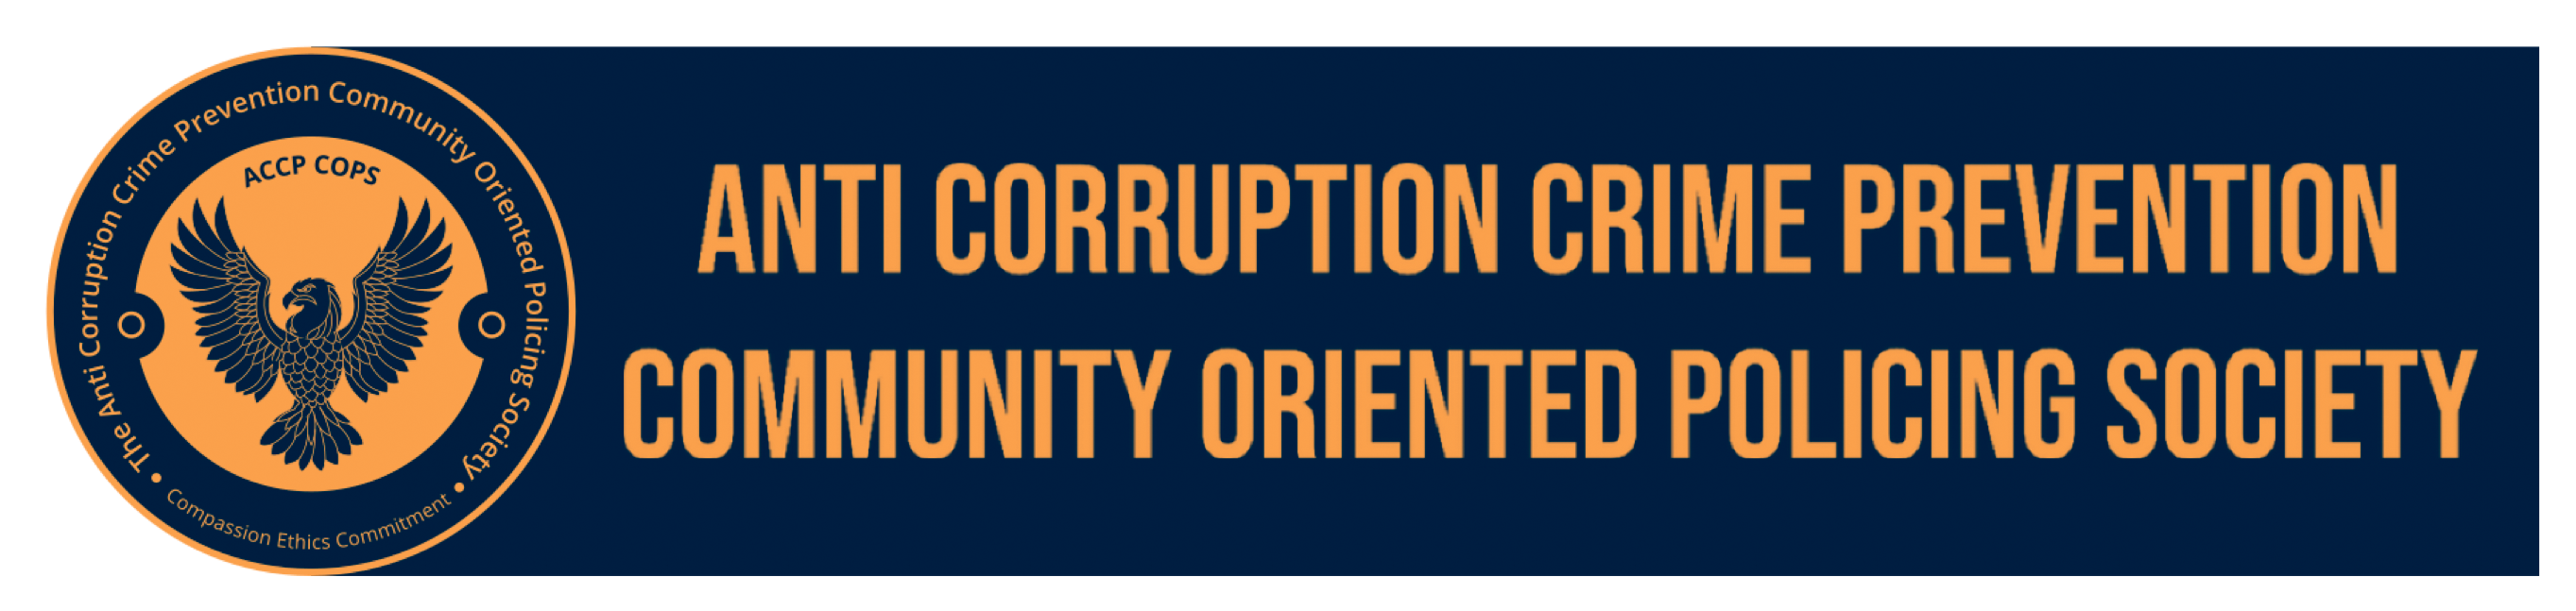 Anti-Corruption Crime Prevention Community Oriented Policing Society